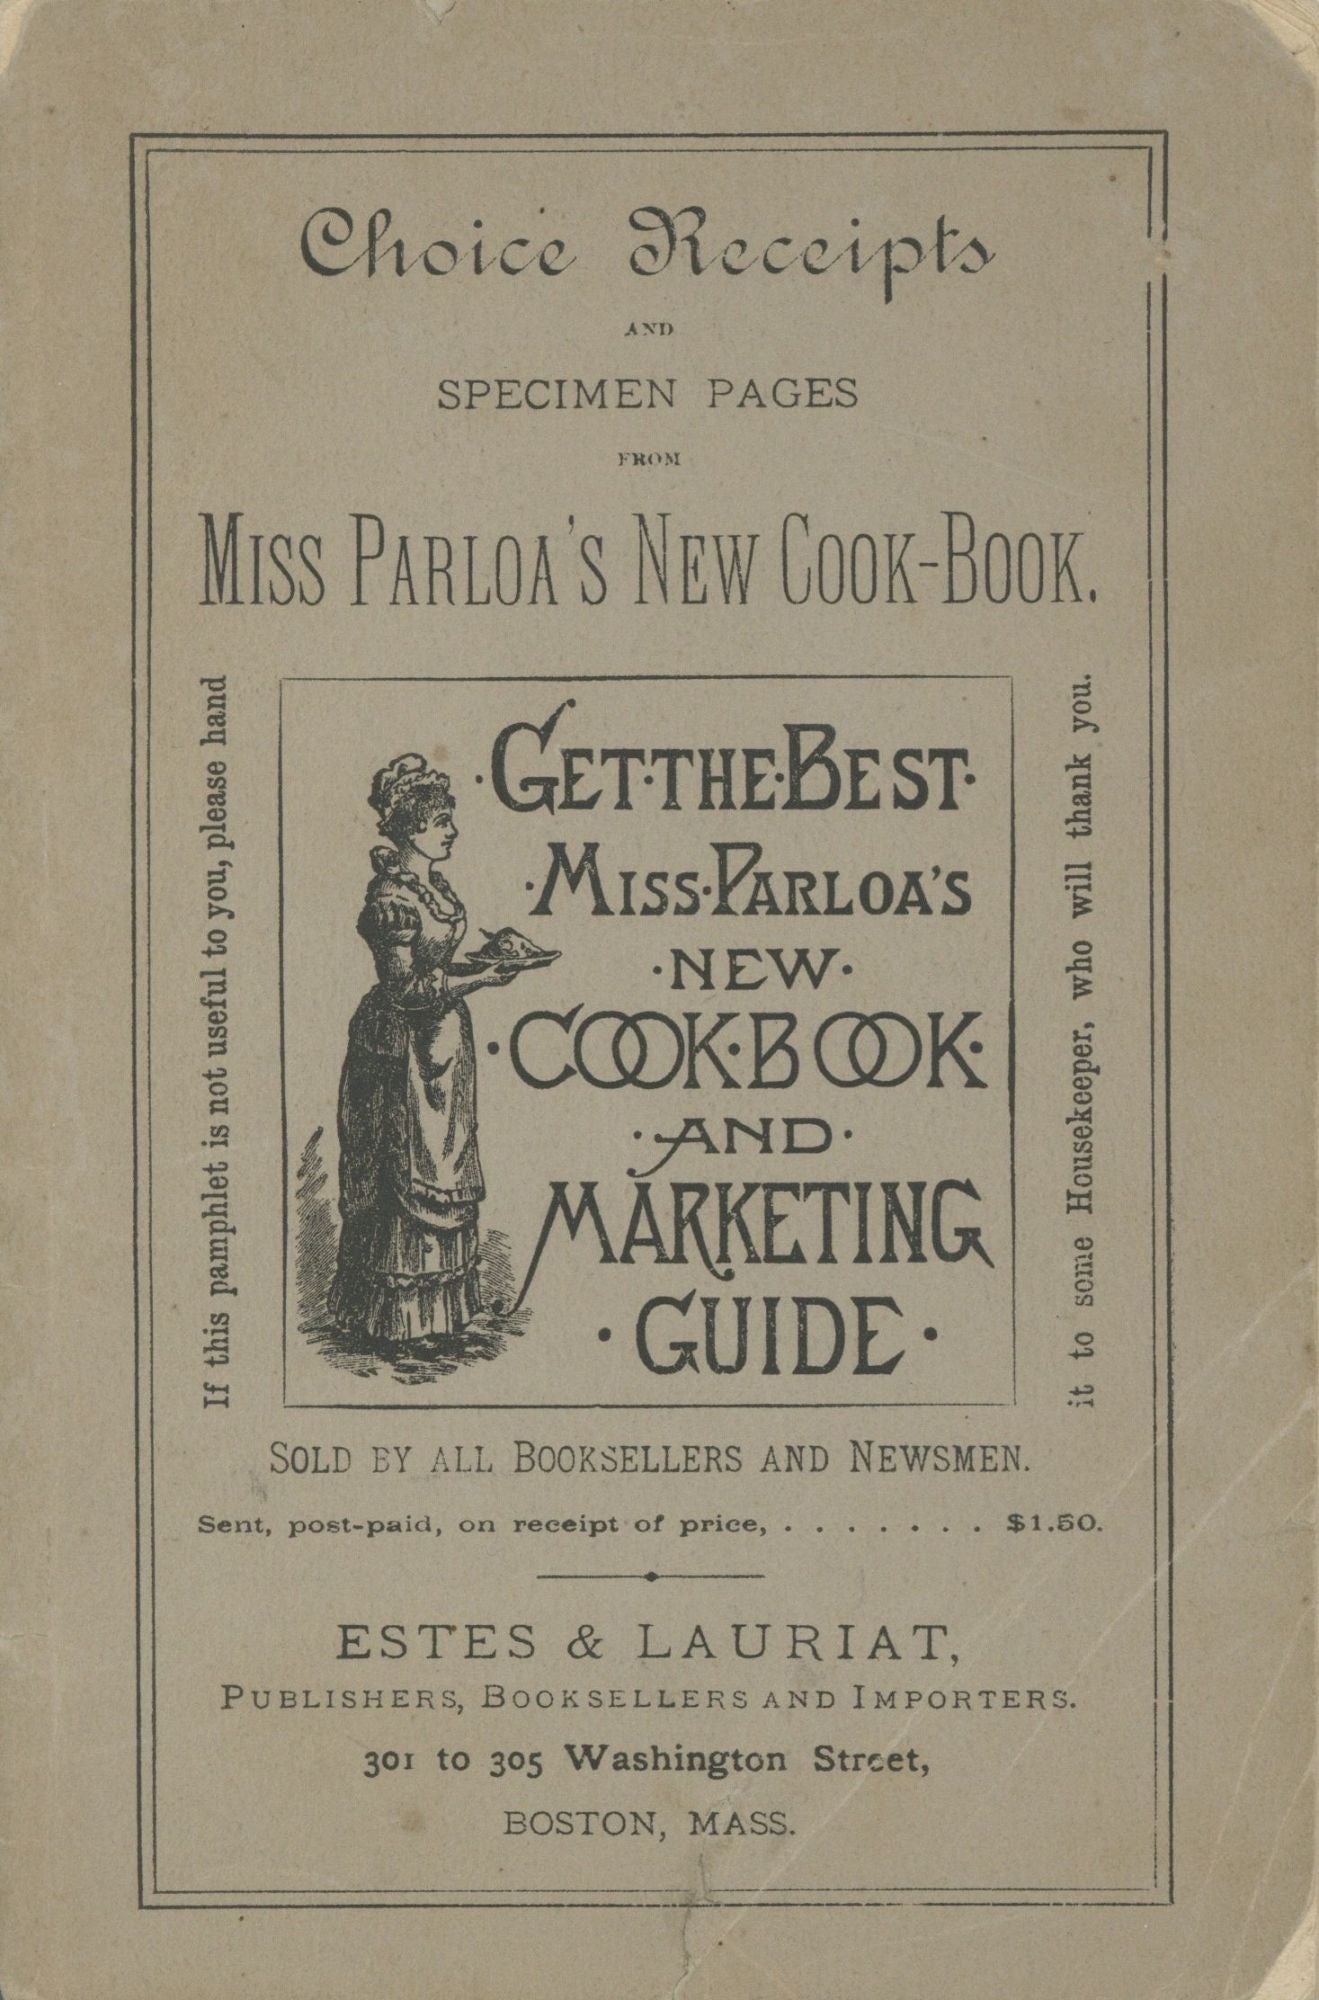 Item #4904 Choice Receipts and Specimen Pages from Miss Parloa's New Cook Book. Sold by all Booksellers and Newsmen. Parloa, Maria.